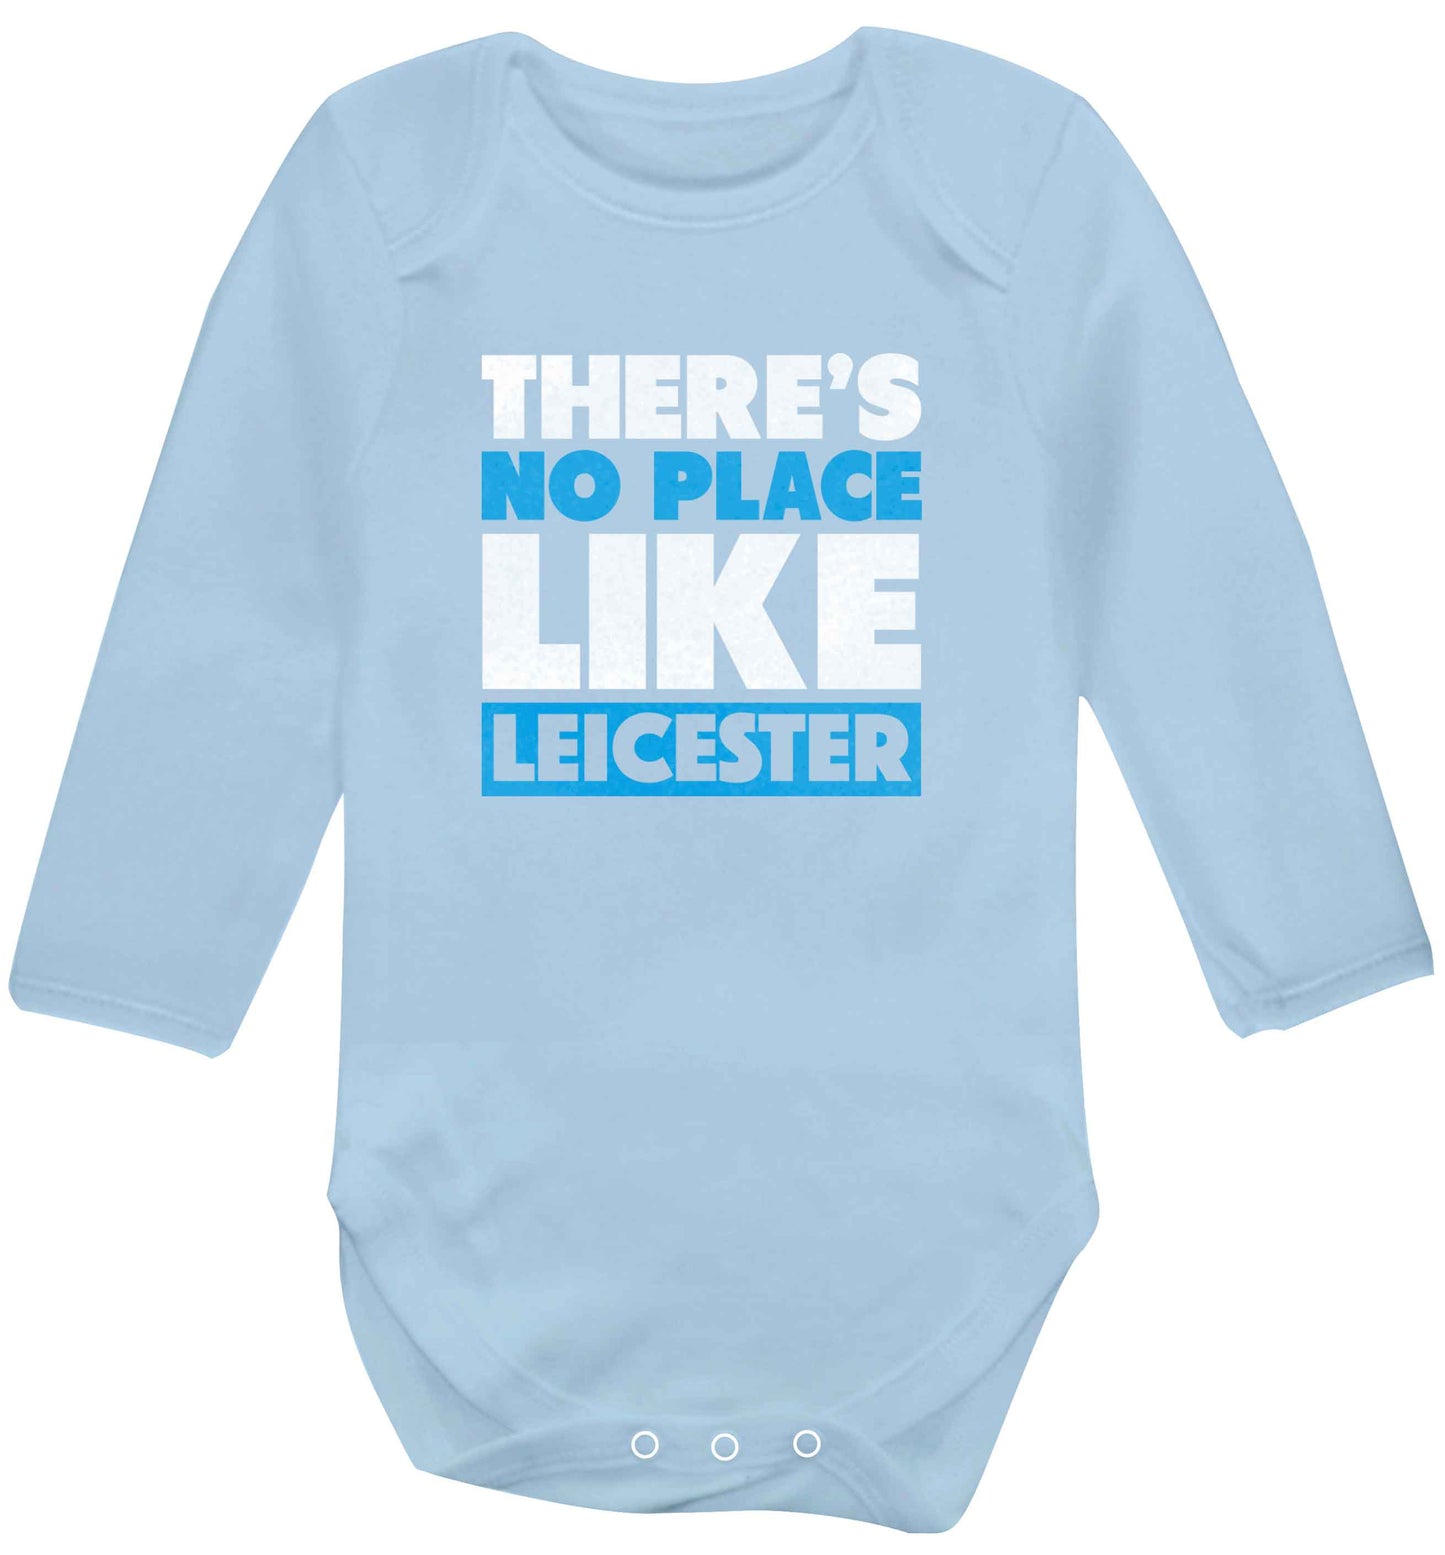 There's no place like Leicester baby vest long sleeved pale blue 6-12 months